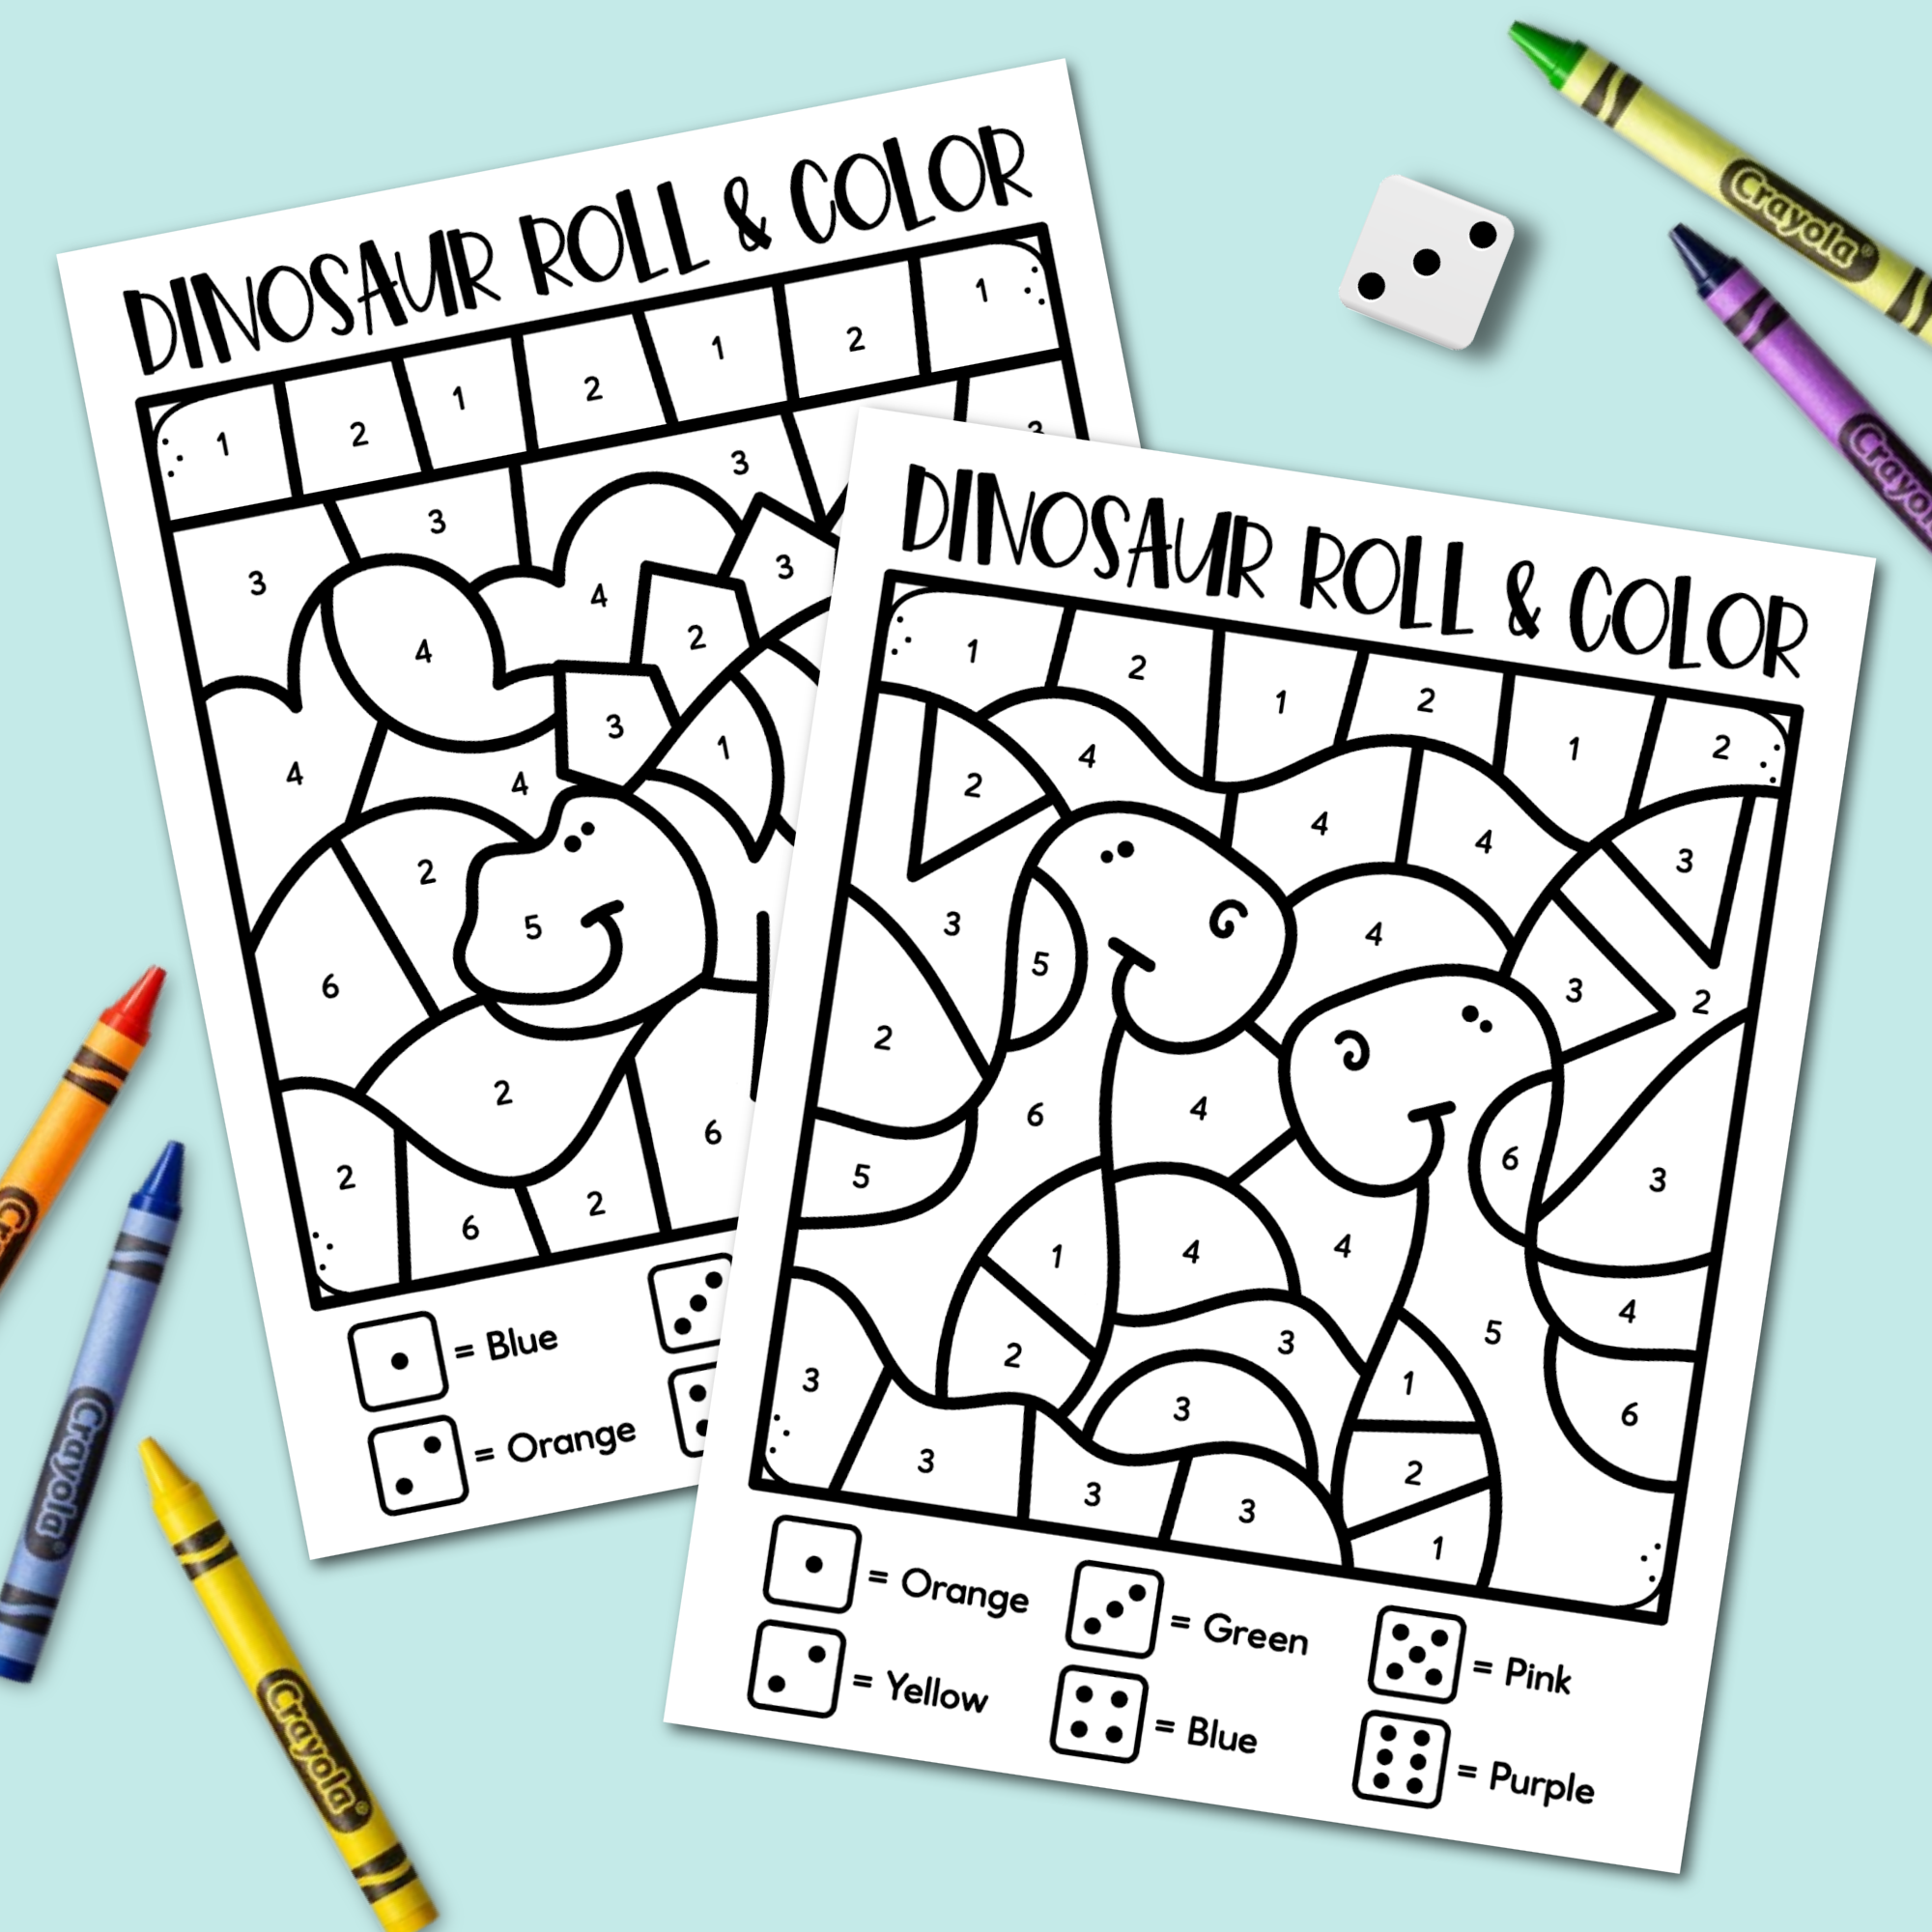 Dinosaur Roll and Color Activity